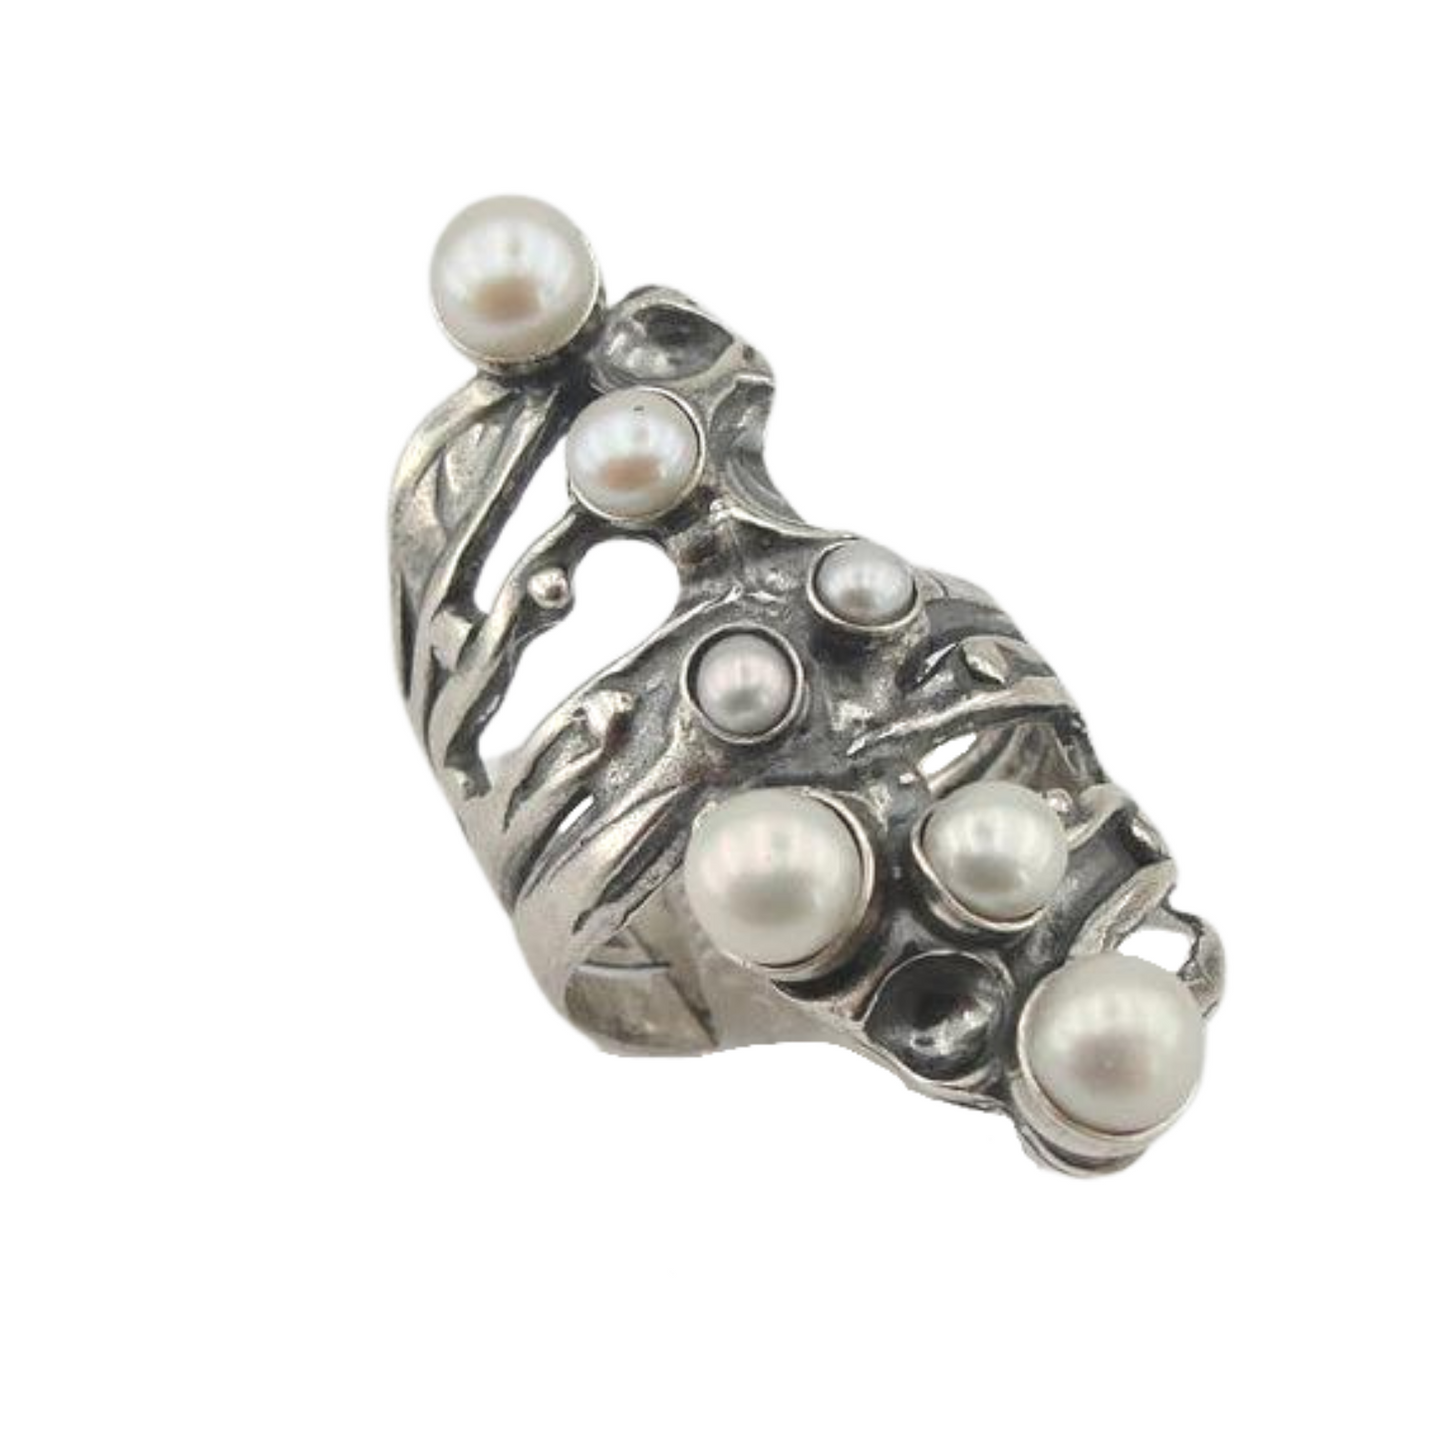 Long Sterling Silver Ring with Fresh Water Natural White Pearls, is a high-quality sterling silver massive ring.